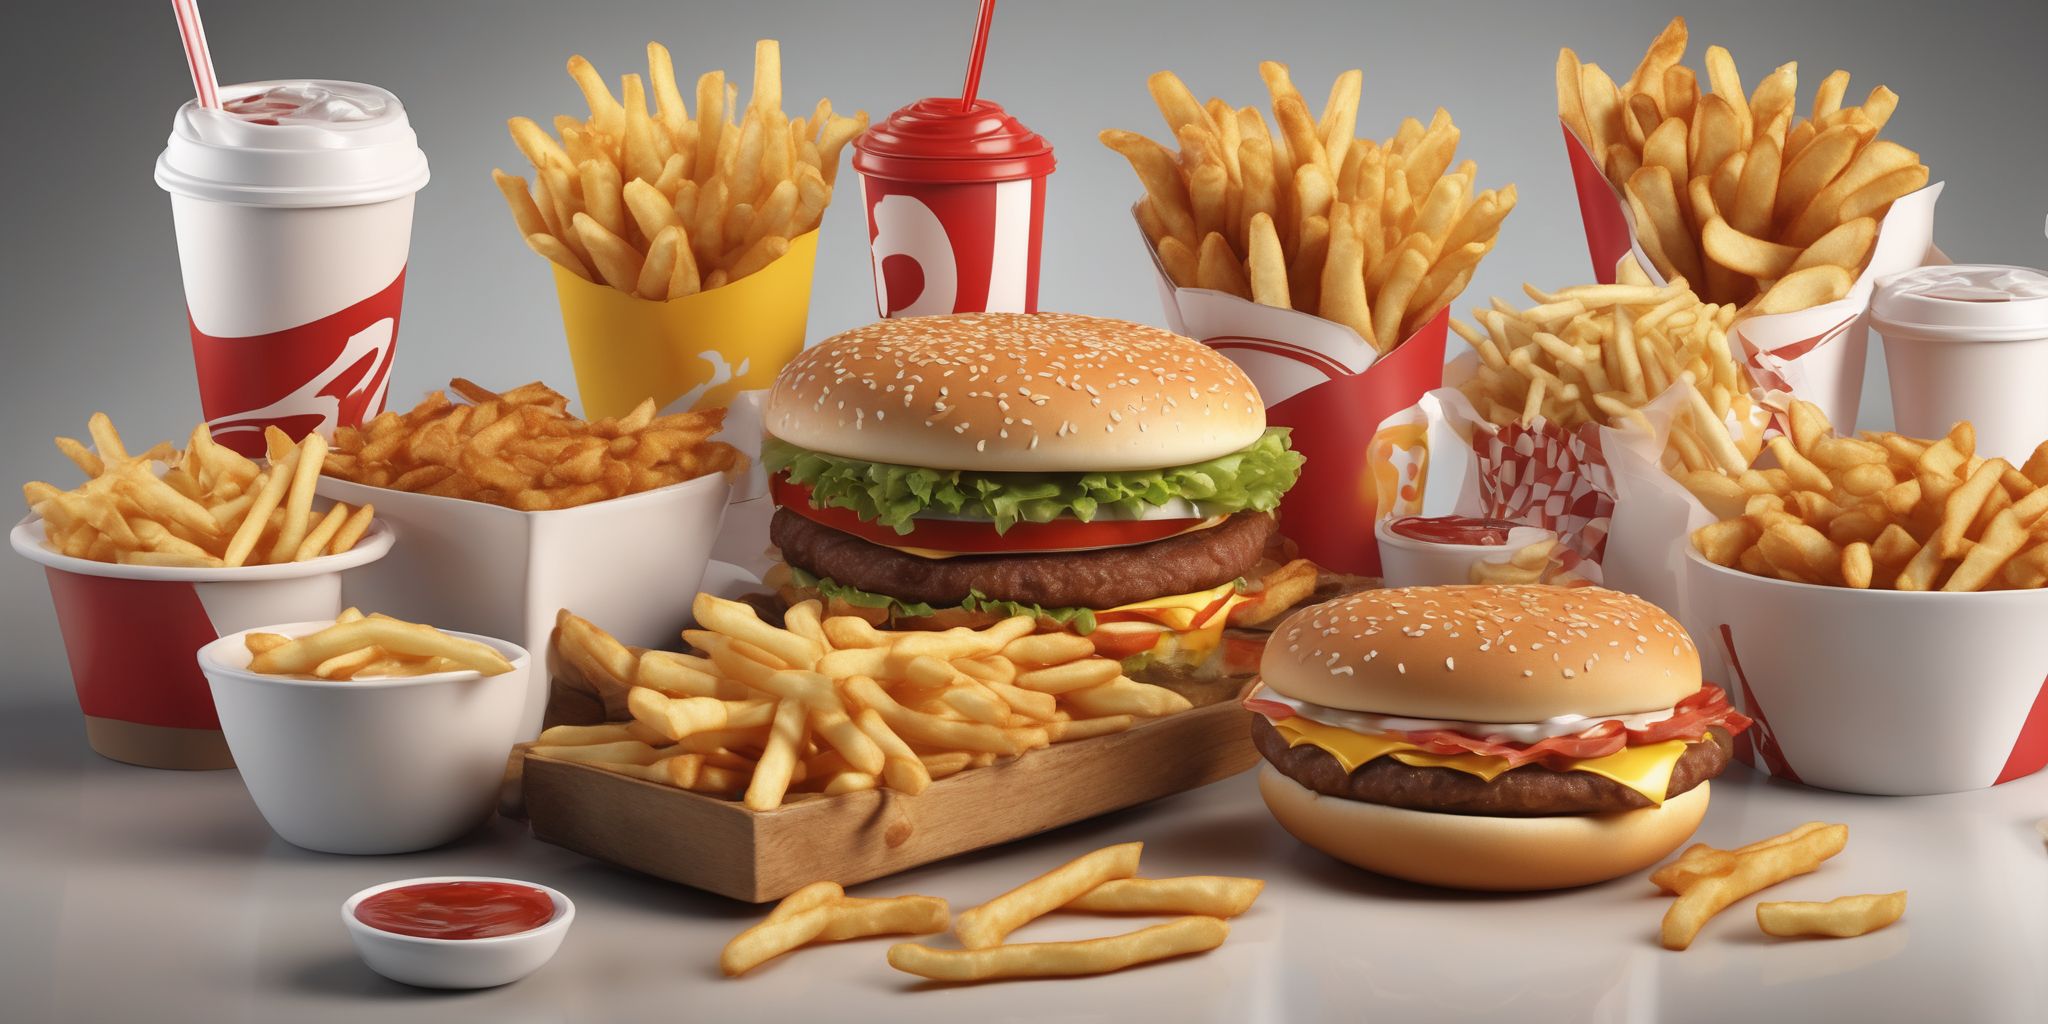 Fast food  in realistic, photographic style